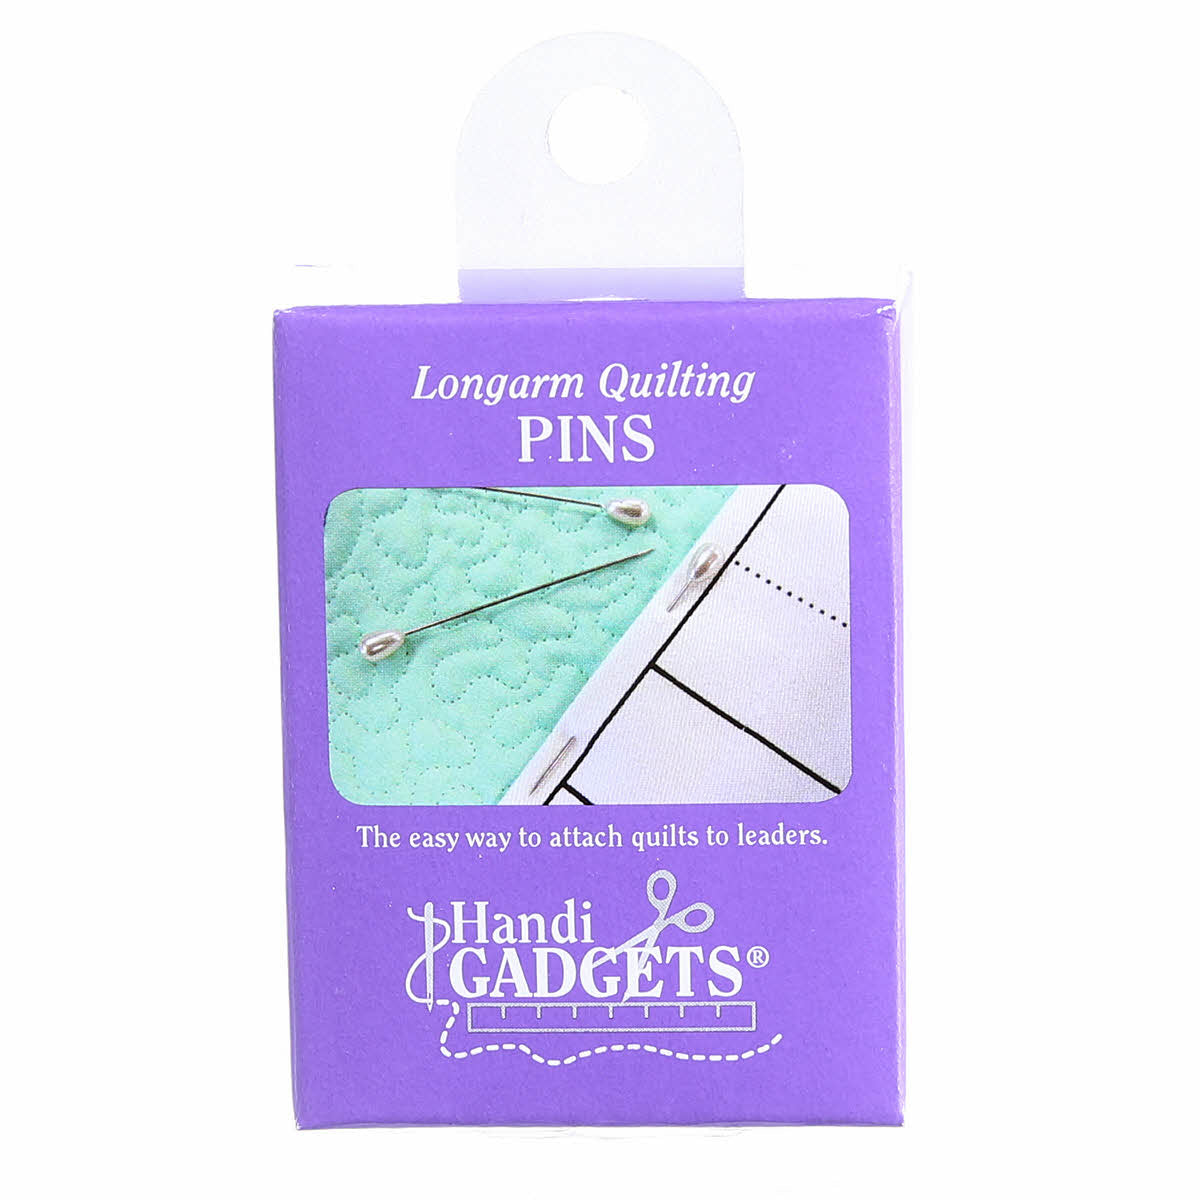 Longarm Quilting Pins (144 2-Inch Pins) from Handi Gadgets by HandiQuilter